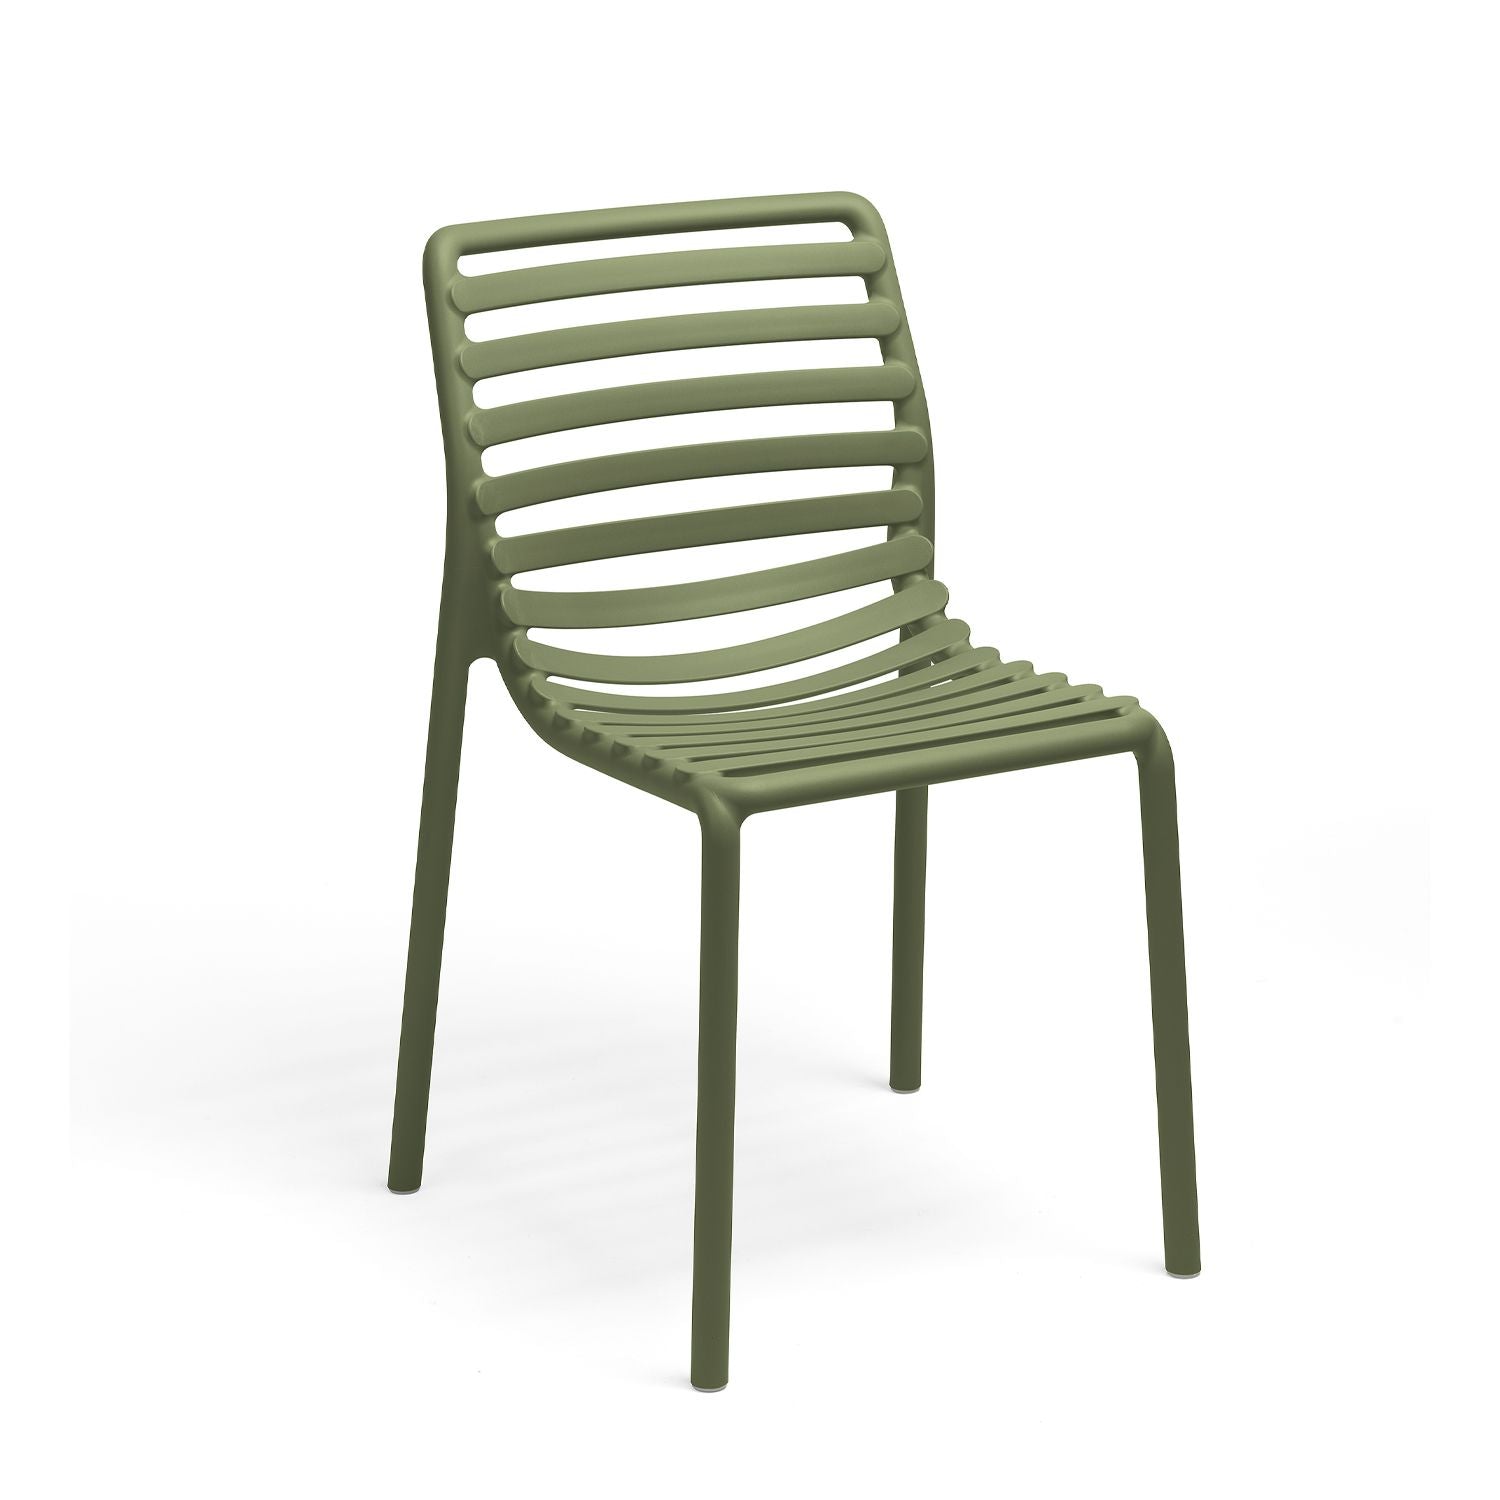 Doga Armless Chair By Nardi - Set Of 6 - Olive